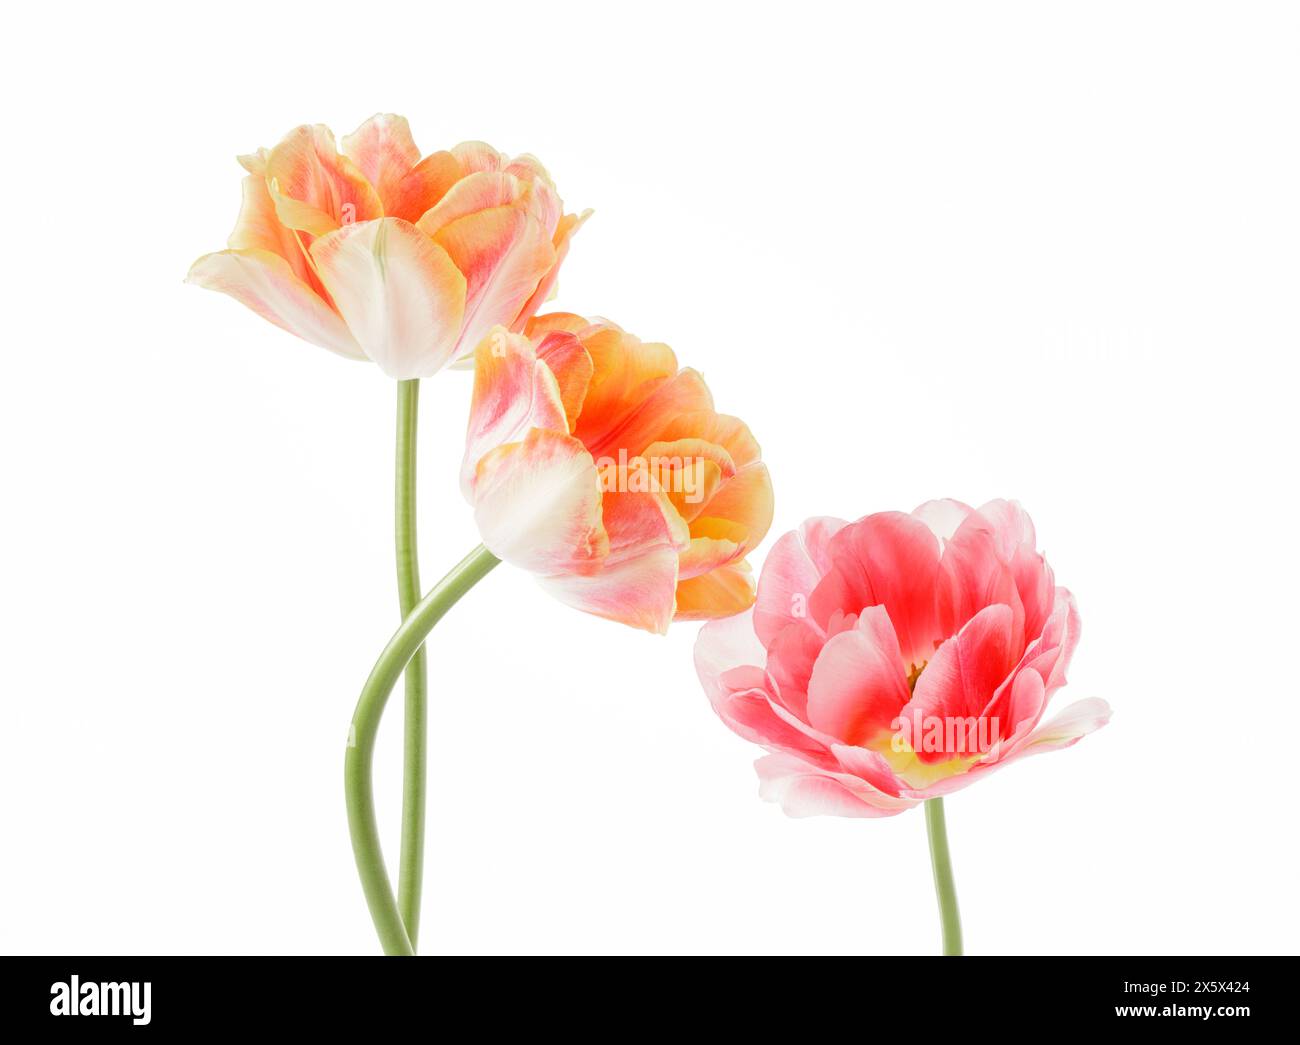 Three Double tulips [2 La Belle Epoque and 1 Angelique] isolated on white background Stock Photo